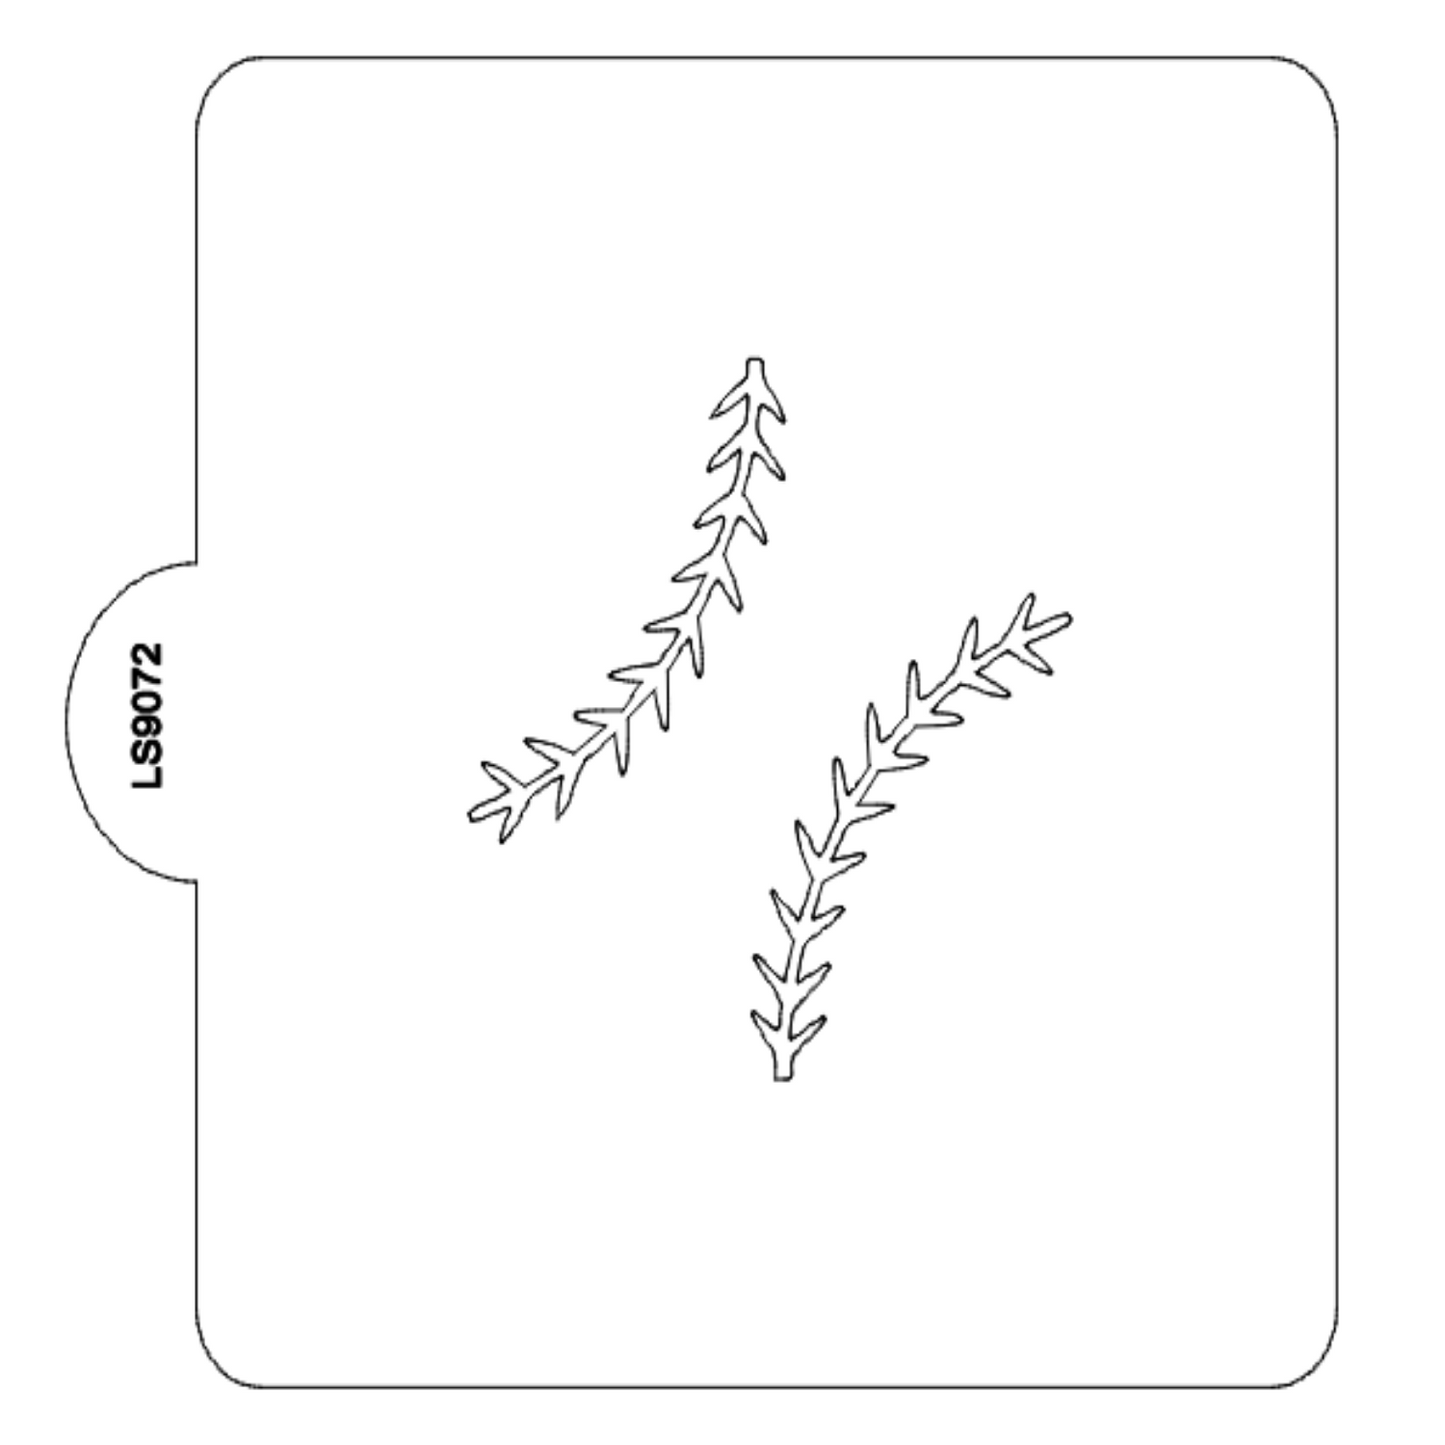 Baseball Softball Stitches Stencil for Cookies or Cake USA Made LS9072